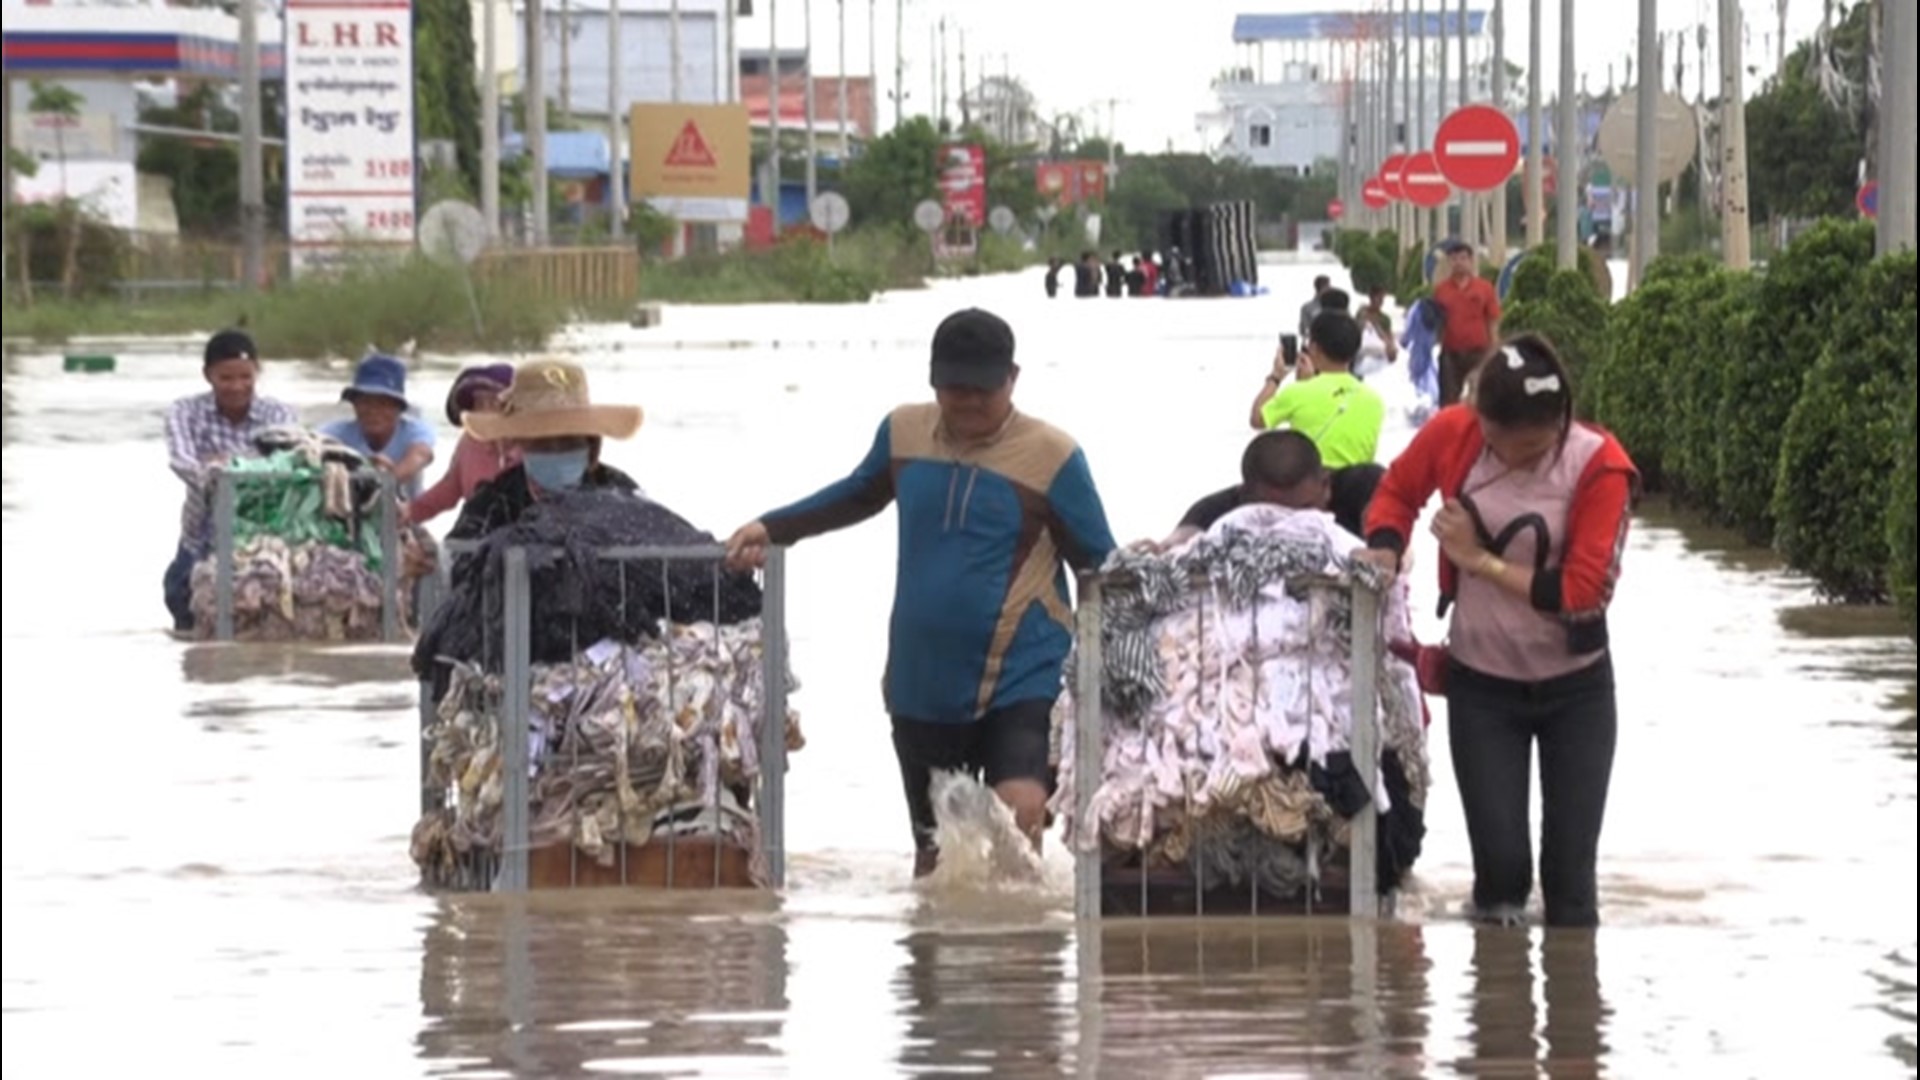 Residents of Phnom Penh, Cambodia, waded through floodwaters as they evacuated from their homes on Oct. 18. The heavy flooding caused at least 20 fatalities.